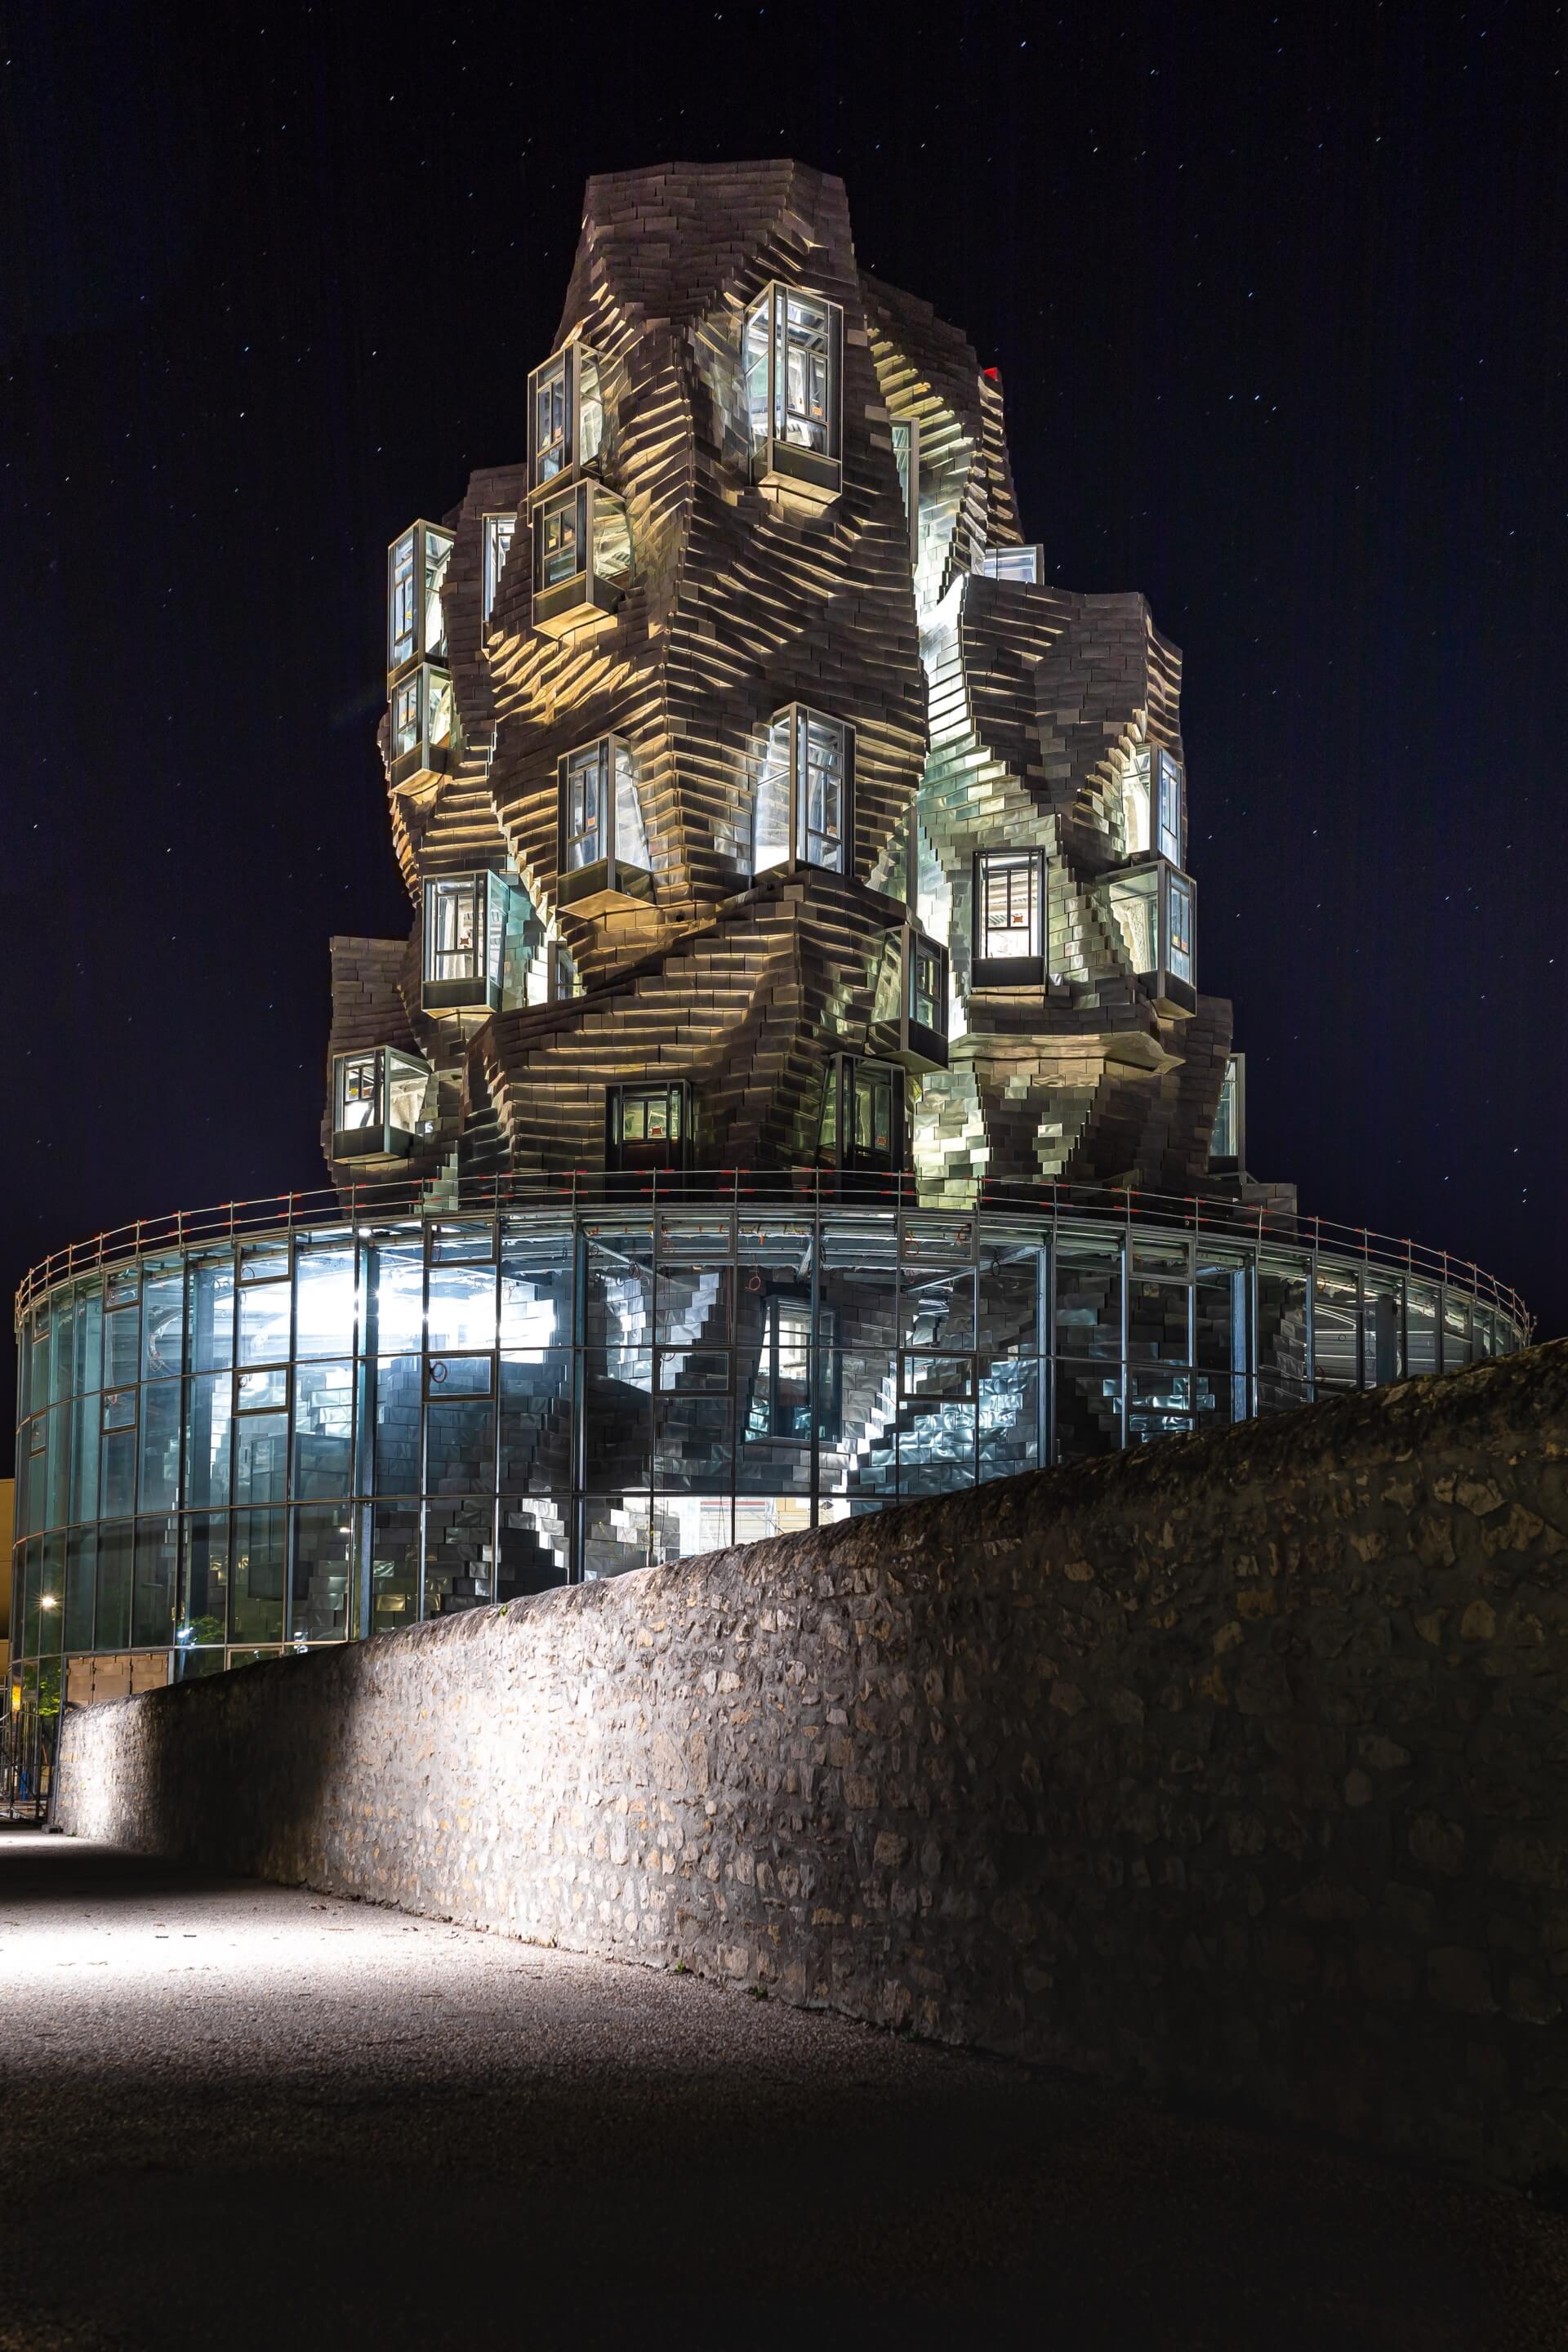 a twisting metal tower atop a circular structure, pictured at night at luma arles